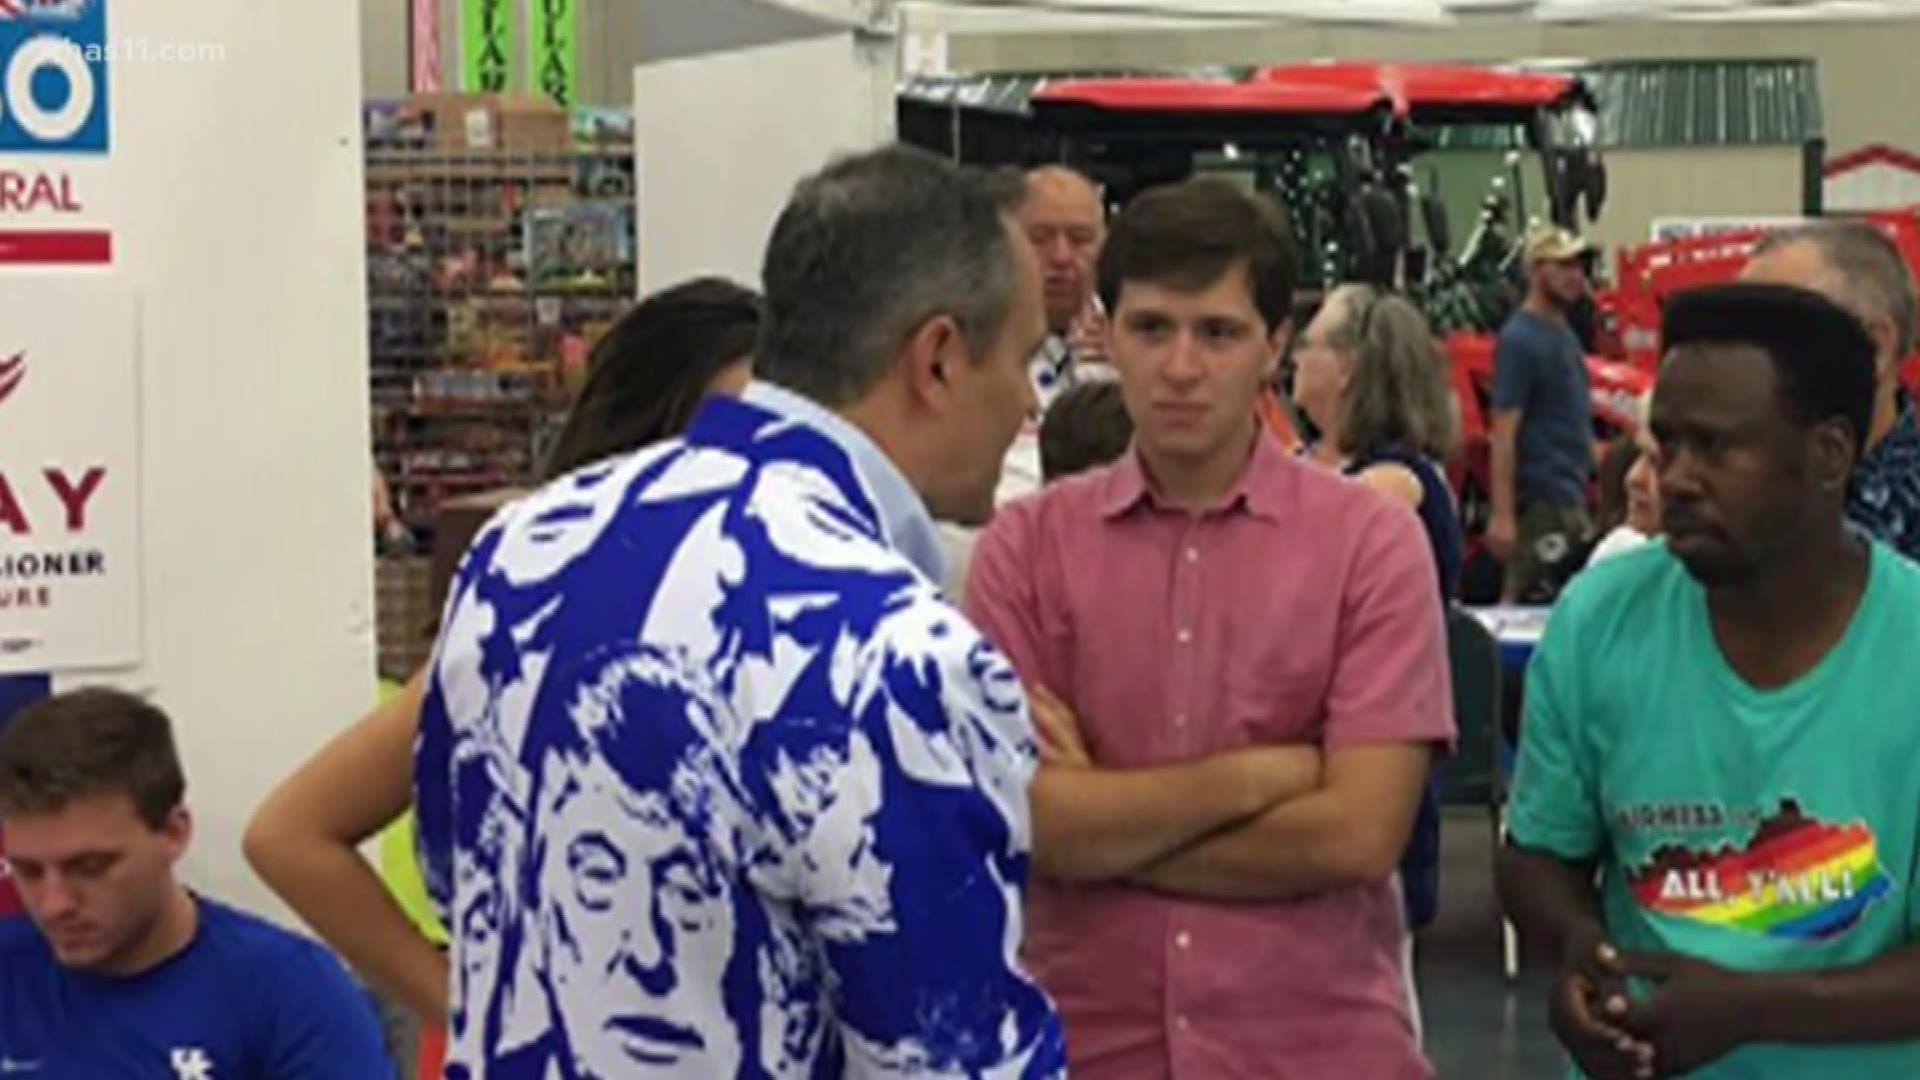 The Kentucky governor had social media abuzz after visiting the Democratic booth at the State Fair wearing a President Trump-inspired blazer.